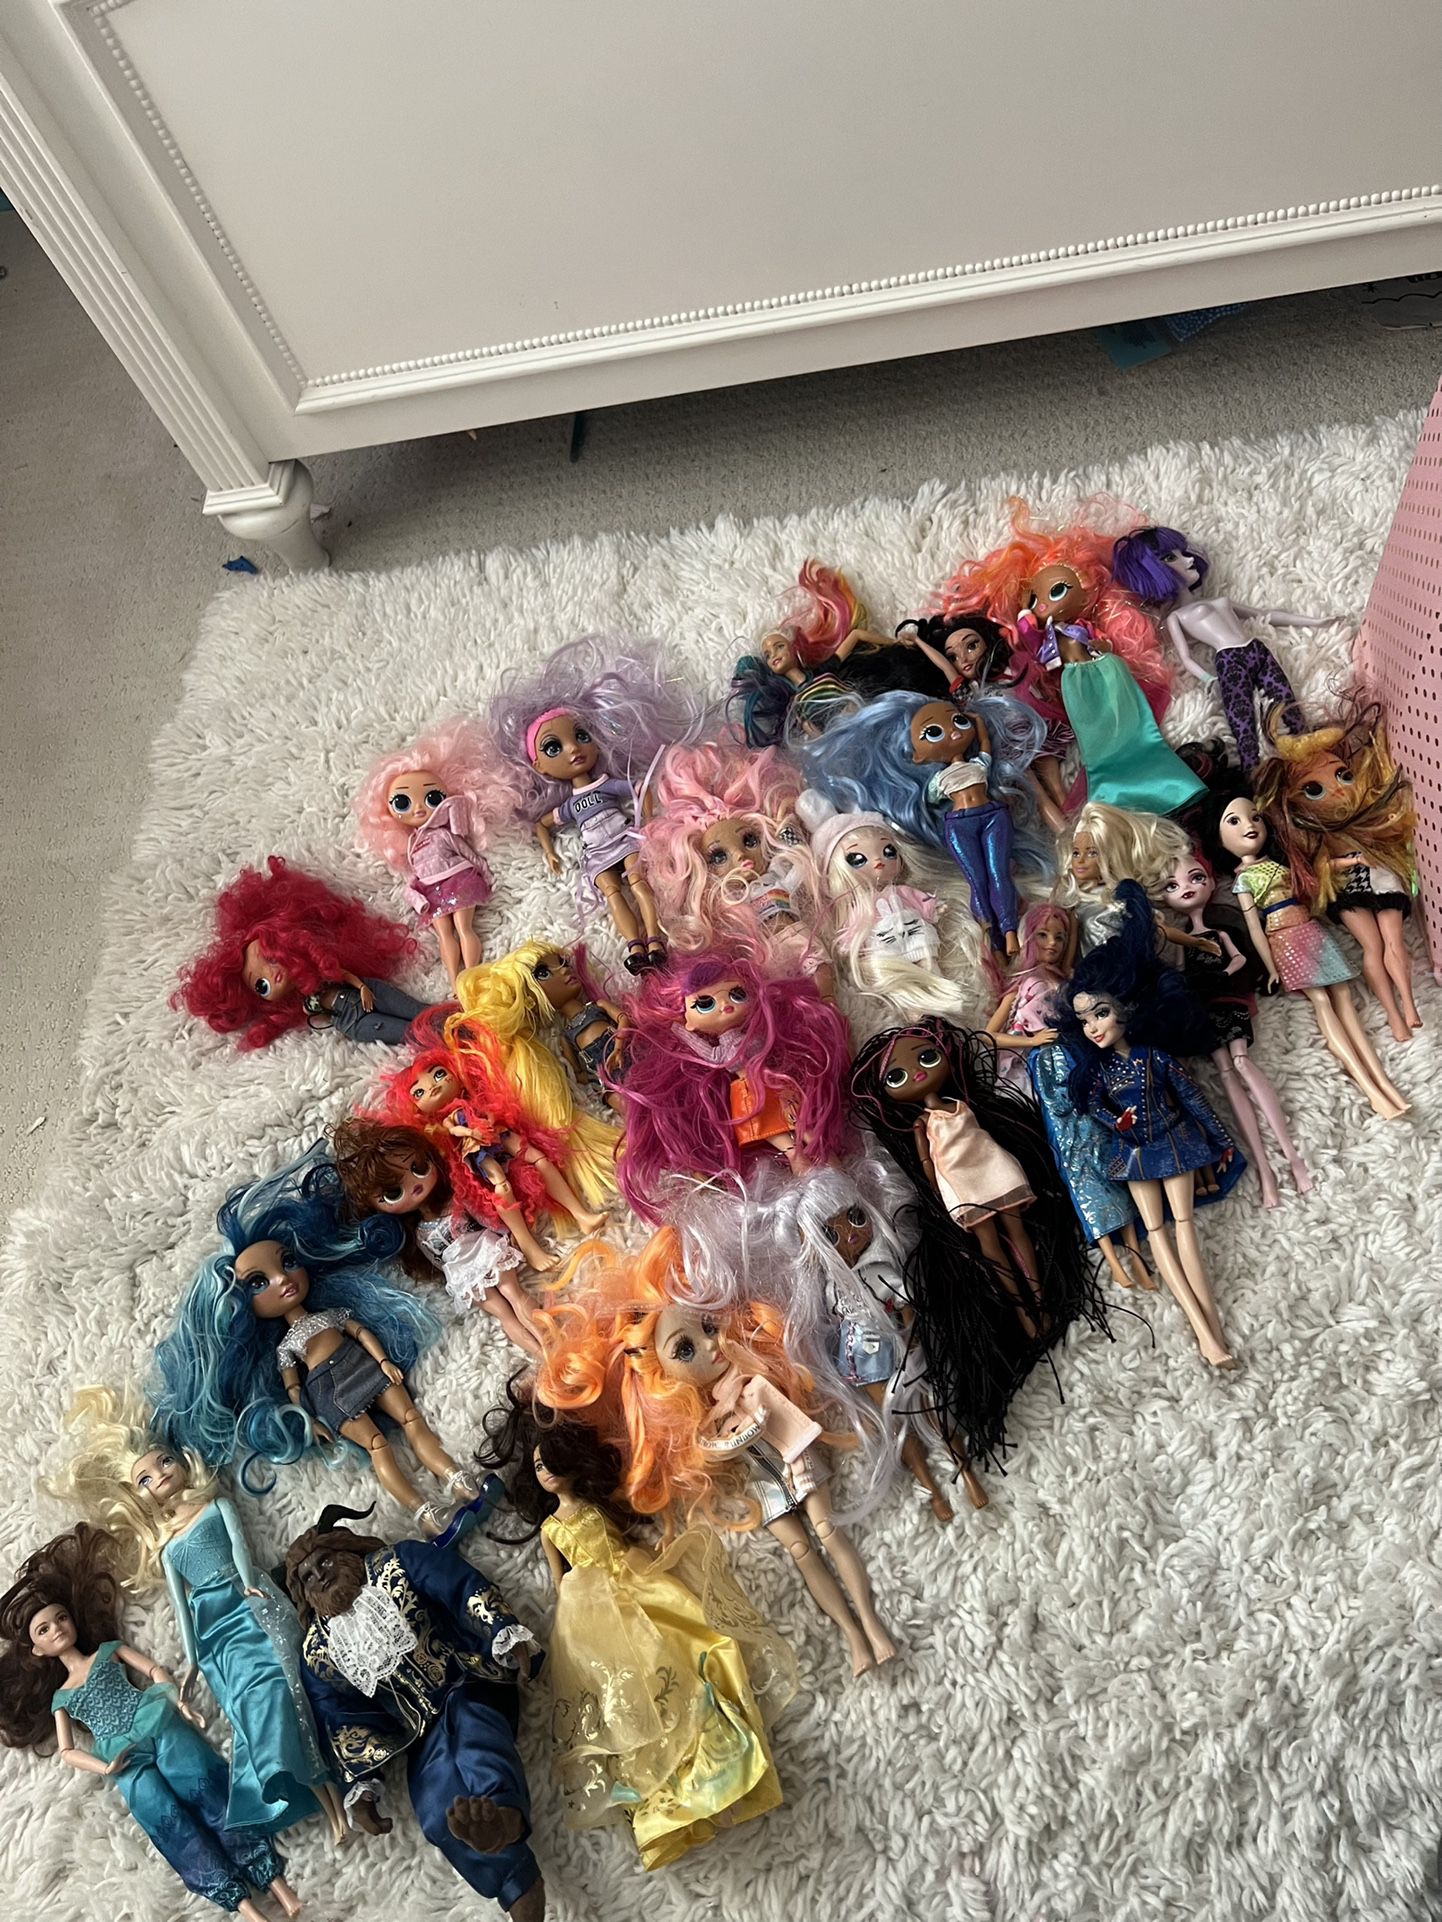 Big Collection Of Dolls